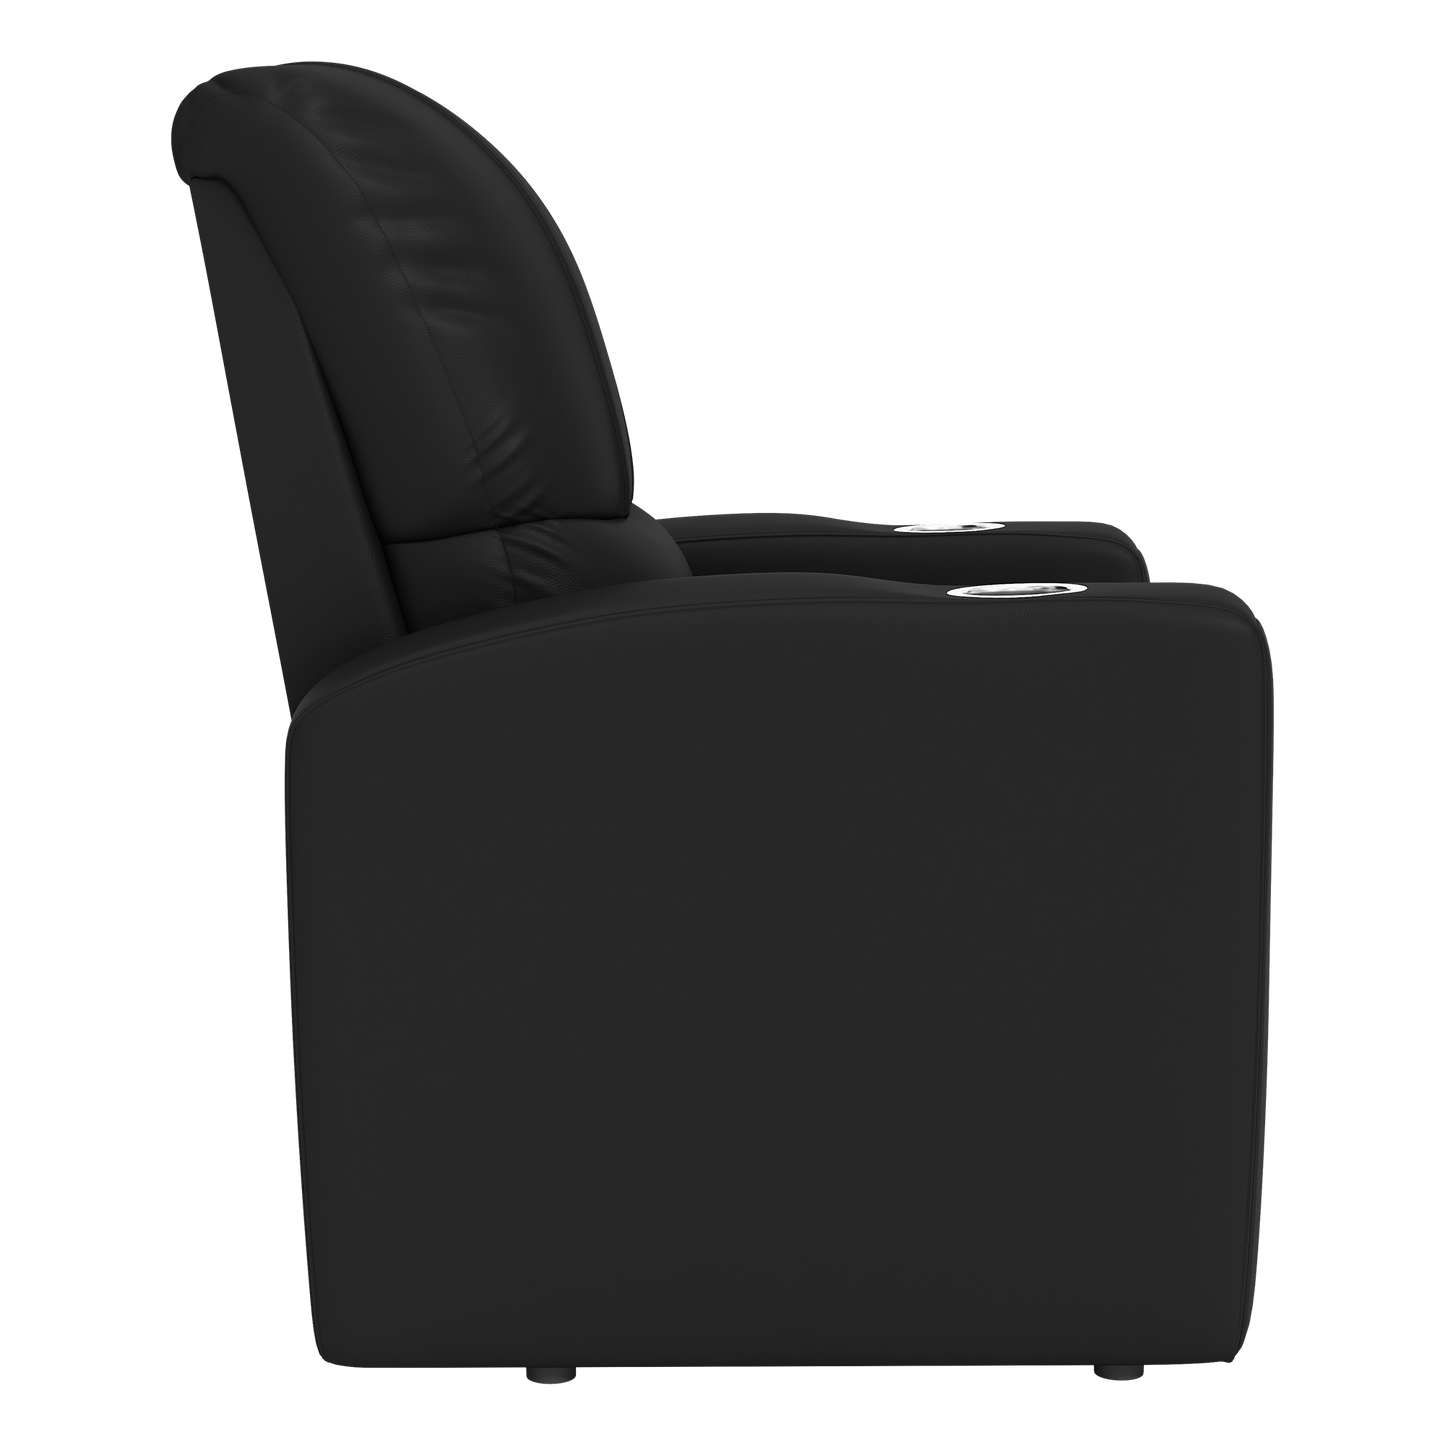 Stealth Recliner with Houston Astros 2017 Champions